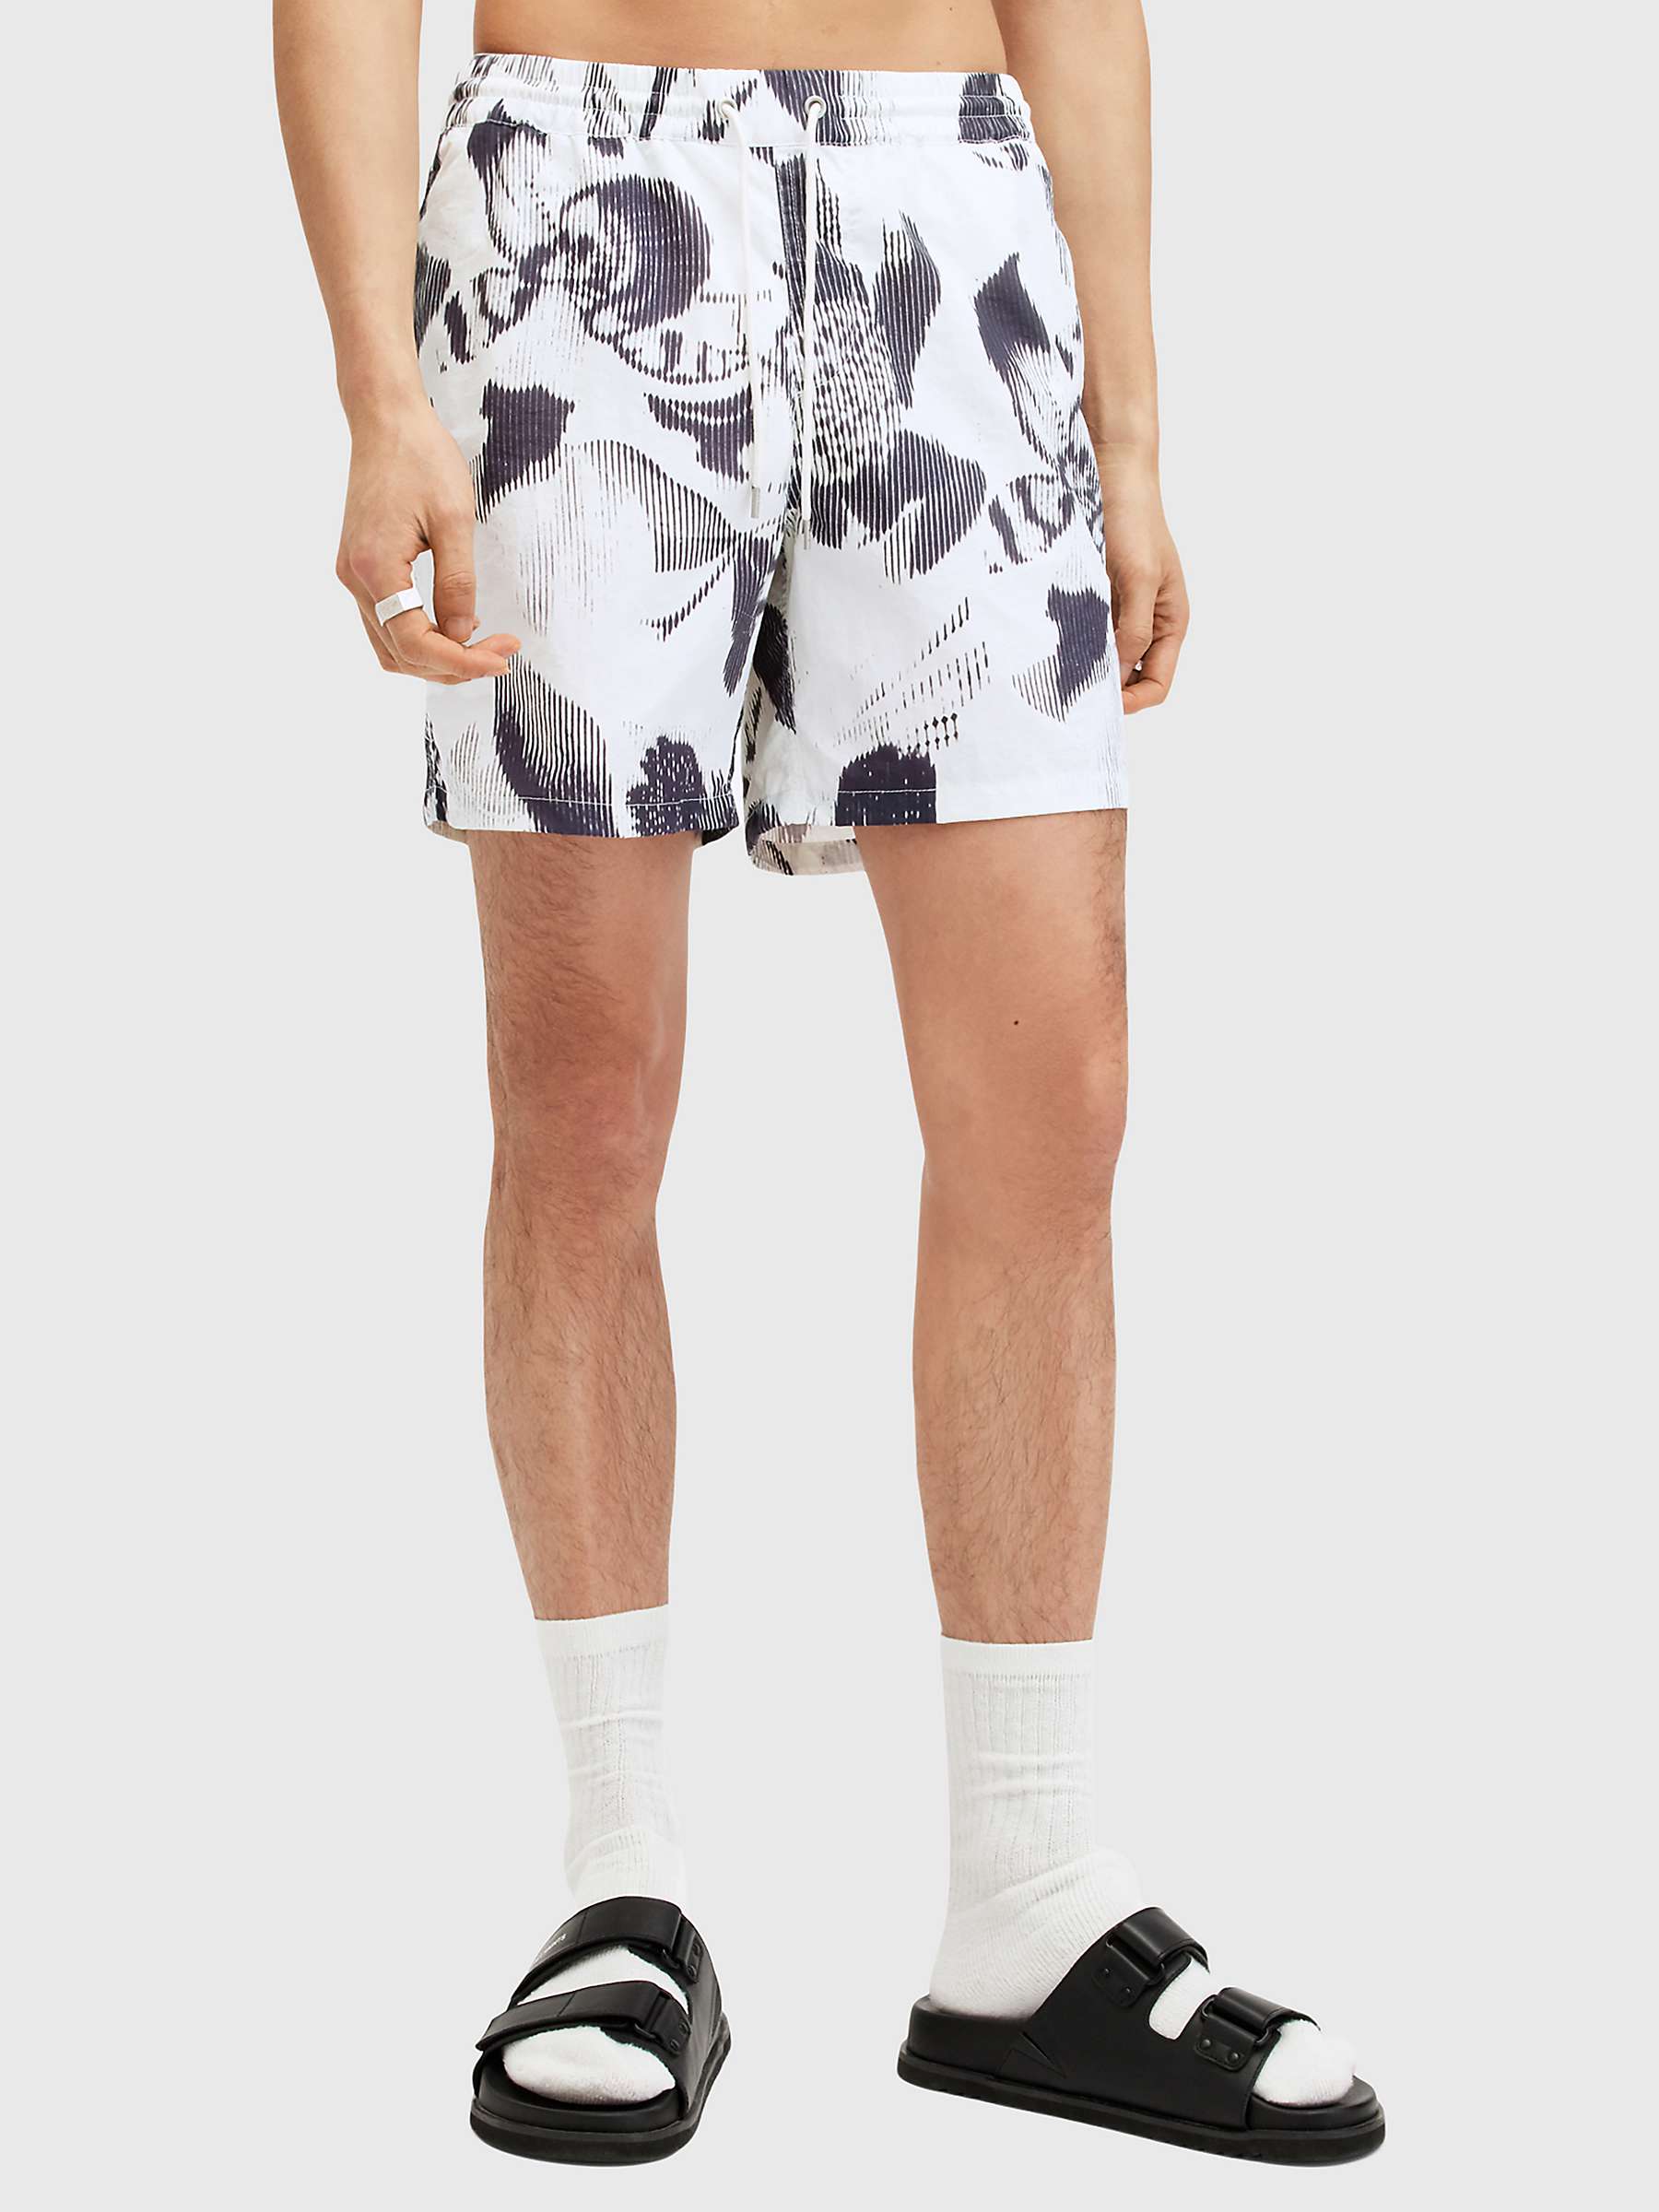 Buy AllSaints Frequency Swim Shorts, White/Multi Online at johnlewis.com